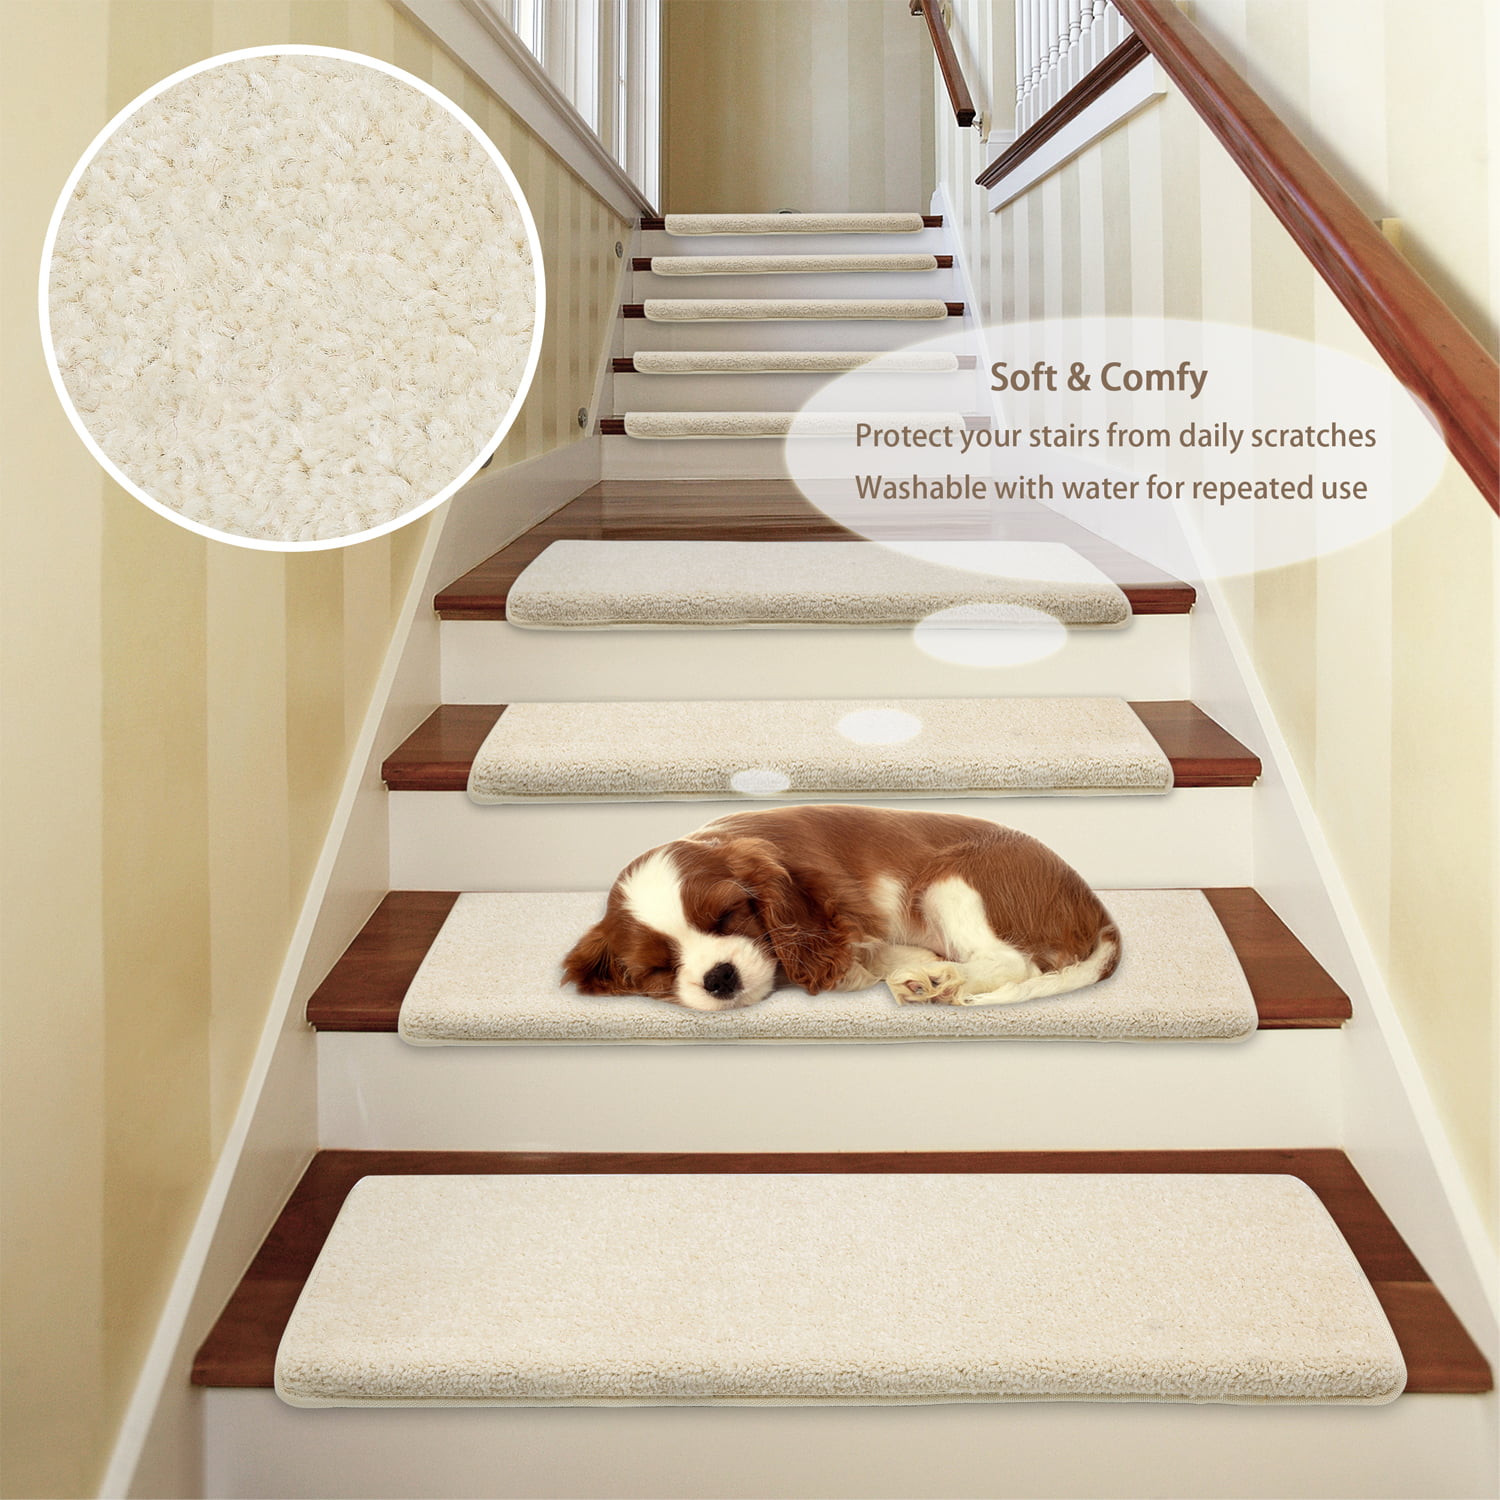 Details about   PURE ERA Bullnose Carpet Stair Treads Set of 14 Non-Slip Self Adhesive Ultra ... 